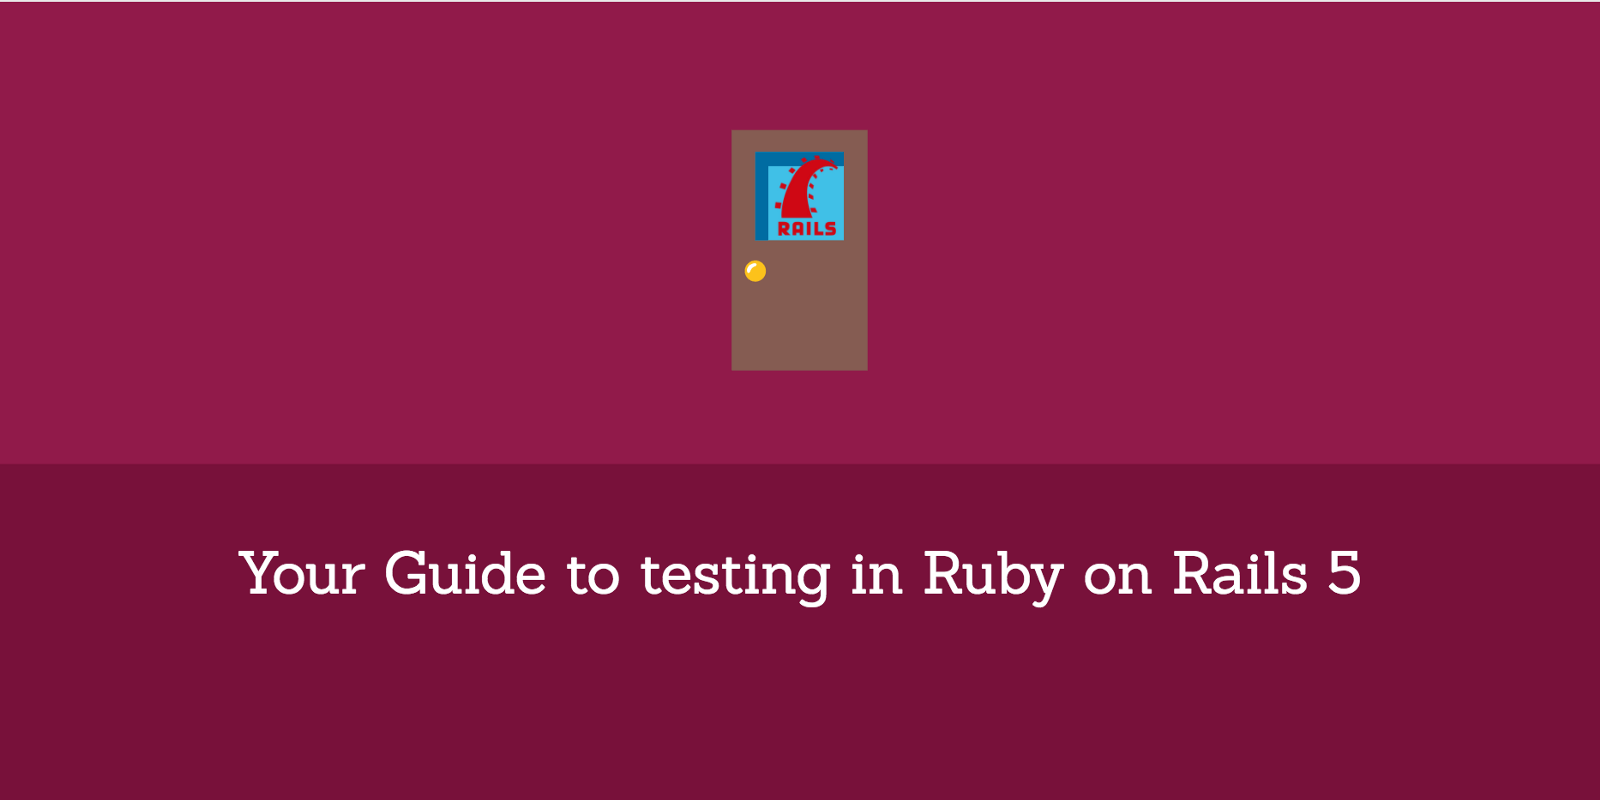 Rails Logo - Your Guide to testing in Ruby on Rails 5